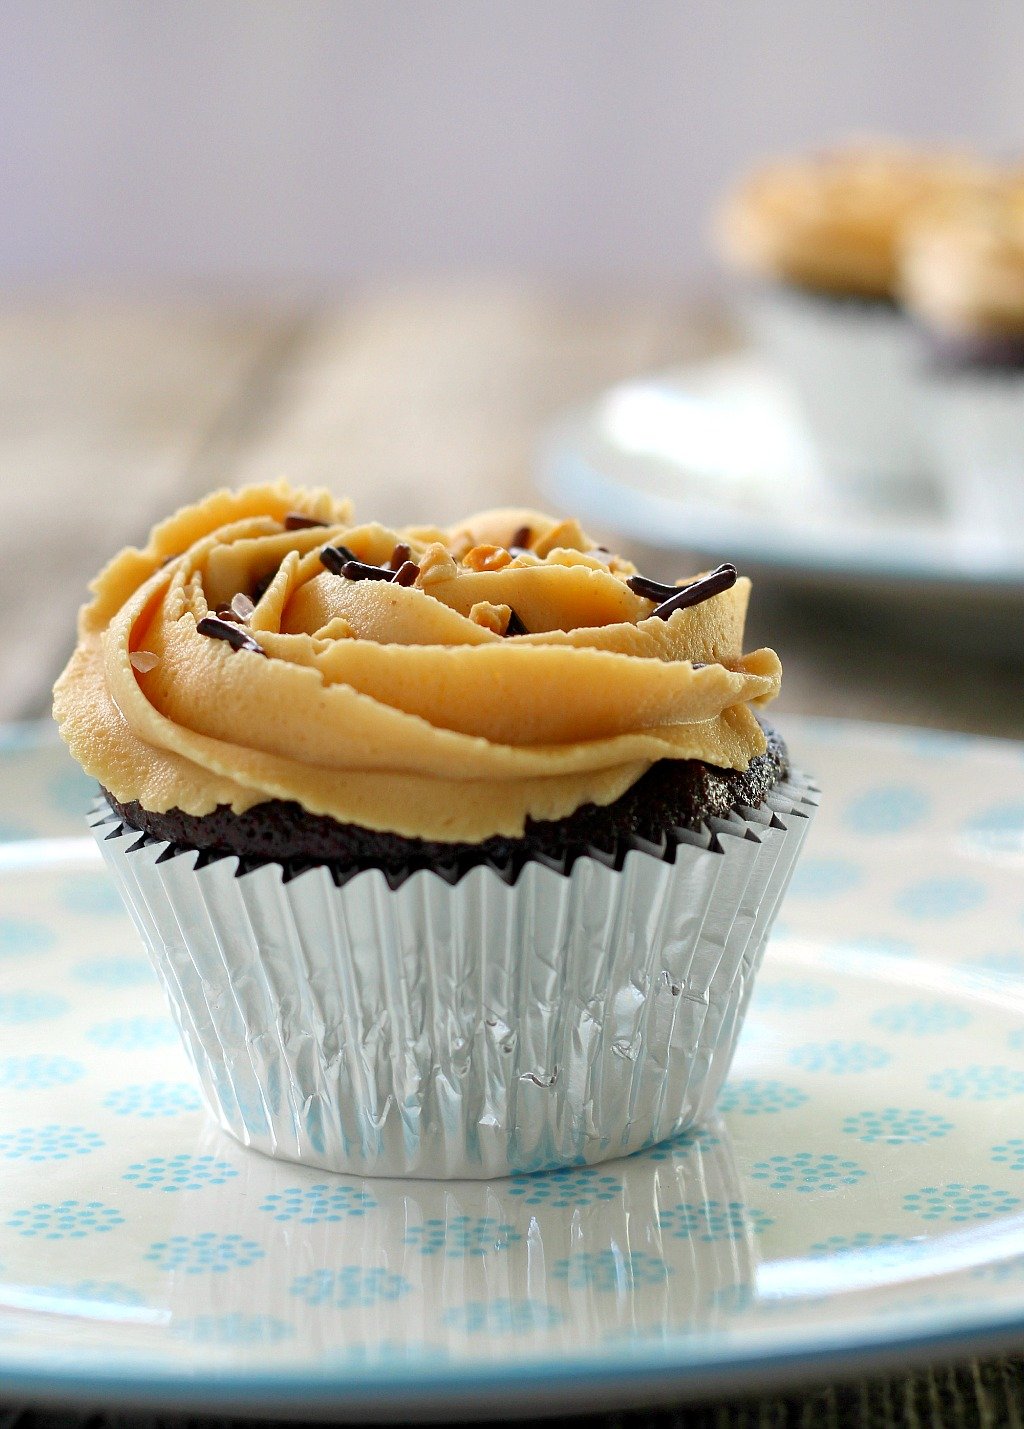 Chocolate Coca-Cola Cupcakes with Peanut Butter Buttercream Frosting are quick and easy, with intense chocolate and peanut butter flavor.